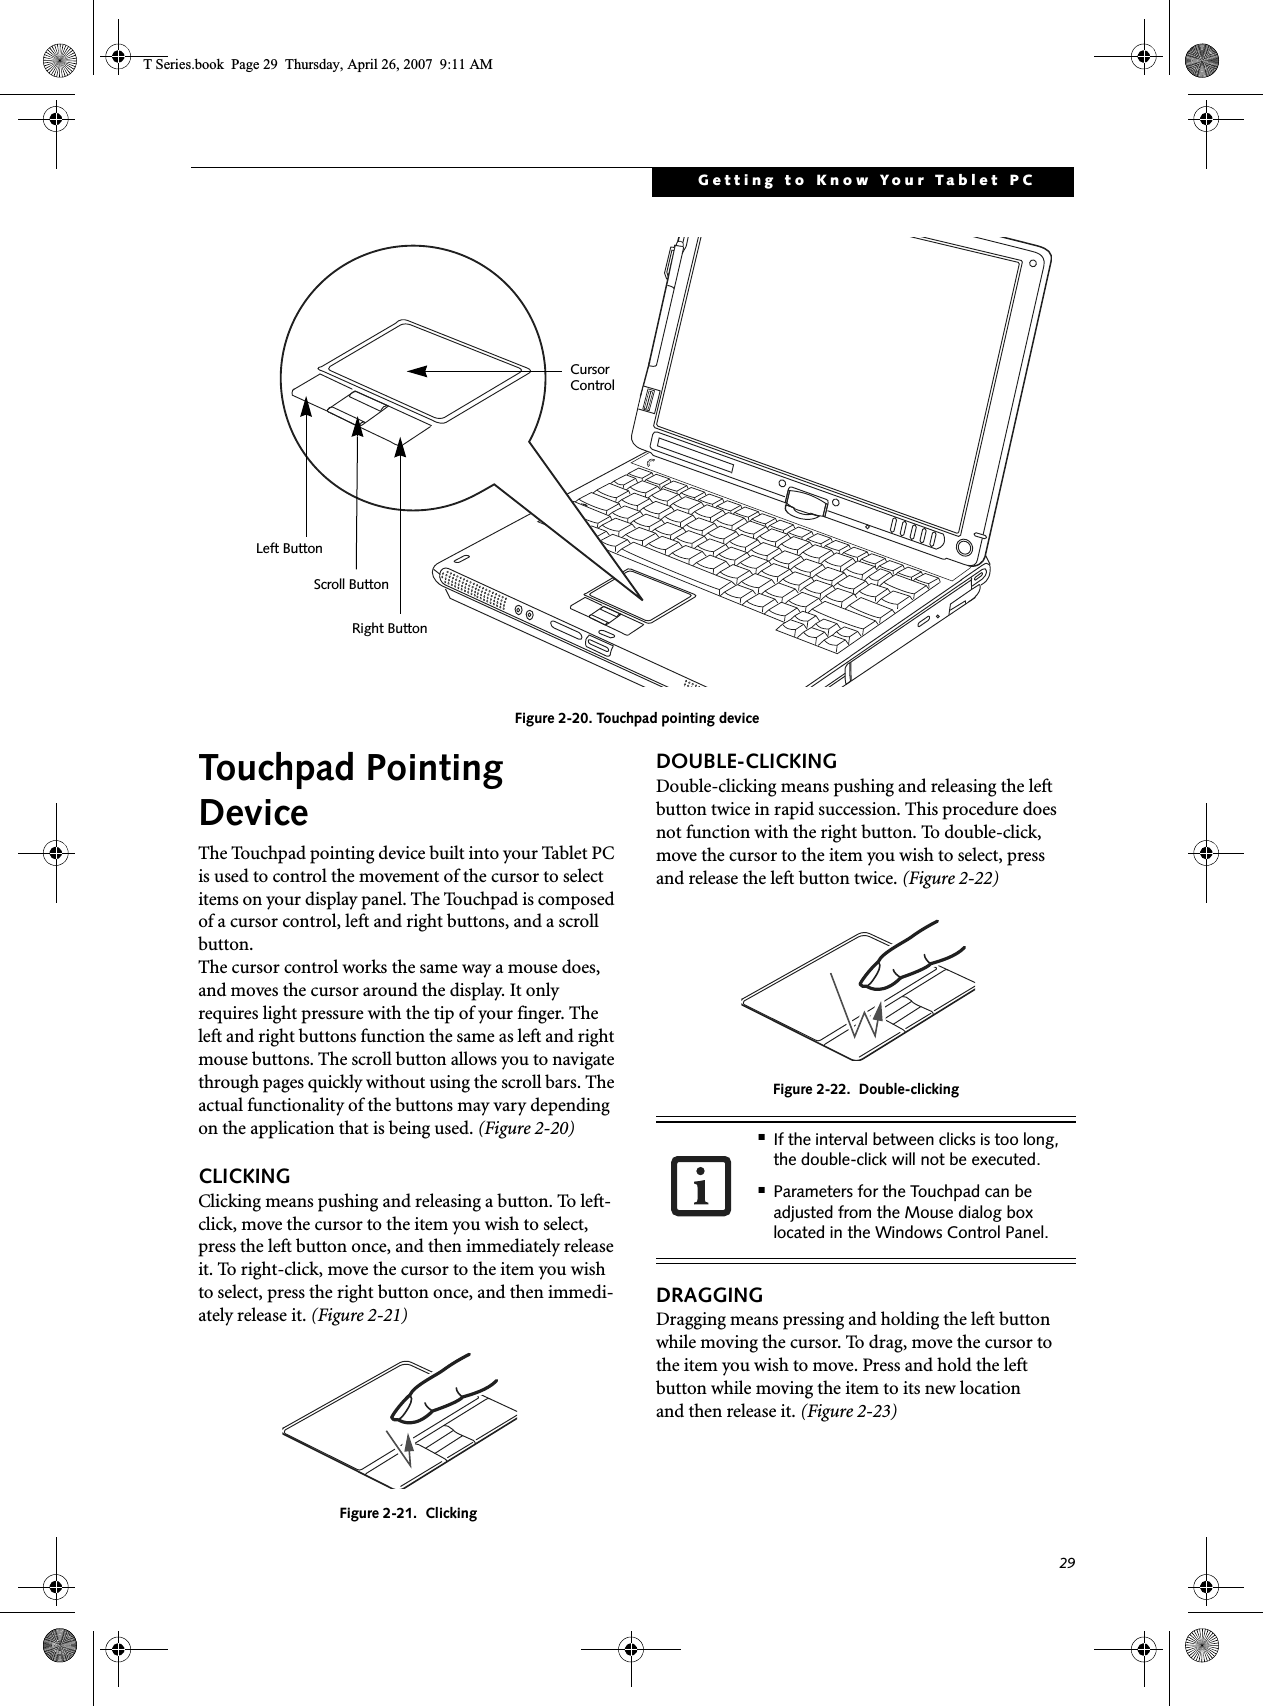 29Getting to Know Your Tablet PCFigure 2-20. Touchpad pointing deviceTouchpad Pointing DeviceThe Touchpad pointing device built into your Tablet PC is used to control the movement of the cursor to select items on your display panel. The Touchpad is composed of a cursor control, left and right buttons, and a scroll button. The cursor control works the same way a mouse does, and moves the cursor around the display. It only requires light pressure with the tip of your finger. The left and right buttons function the same as left and right mouse buttons. The scroll button allows you to navigate through pages quickly without using the scroll bars. The actual functionality of the buttons may vary depending on the application that is being used. (Figure 2-20)CLICKINGClicking means pushing and releasing a button. To left-click, move the cursor to the item you wish to select, press the left button once, and then immediately release it. To right-click, move the cursor to the item you wish to select, press the right button once, and then immedi-ately release it. (Figure 2-21)Figure 2-21.  ClickingDOUBLE-CLICKINGDouble-clicking means pushing and releasing the left button twice in rapid succession. This procedure does not function with the right button. To double-click, move the cursor to the item you wish to select, pressand release the left button twice. (Figure 2-22)Figure 2-22.  Double-clickingDRAGGINGDragging means pressing and holding the left button while moving the cursor. To drag, move the cursor tothe item you wish to move. Press and hold the left button while moving the item to its new locationand then release it. (Figure 2-23)Left ButtonRight ButtonScroll ButtonCursor Control■If the interval between clicks is too long, the double-click will not be executed.■Parameters for the Touchpad can be adjusted from the Mouse dialog box located in the Windows Control Panel.T Series.book  Page 29  Thursday, April 26, 2007  9:11 AM